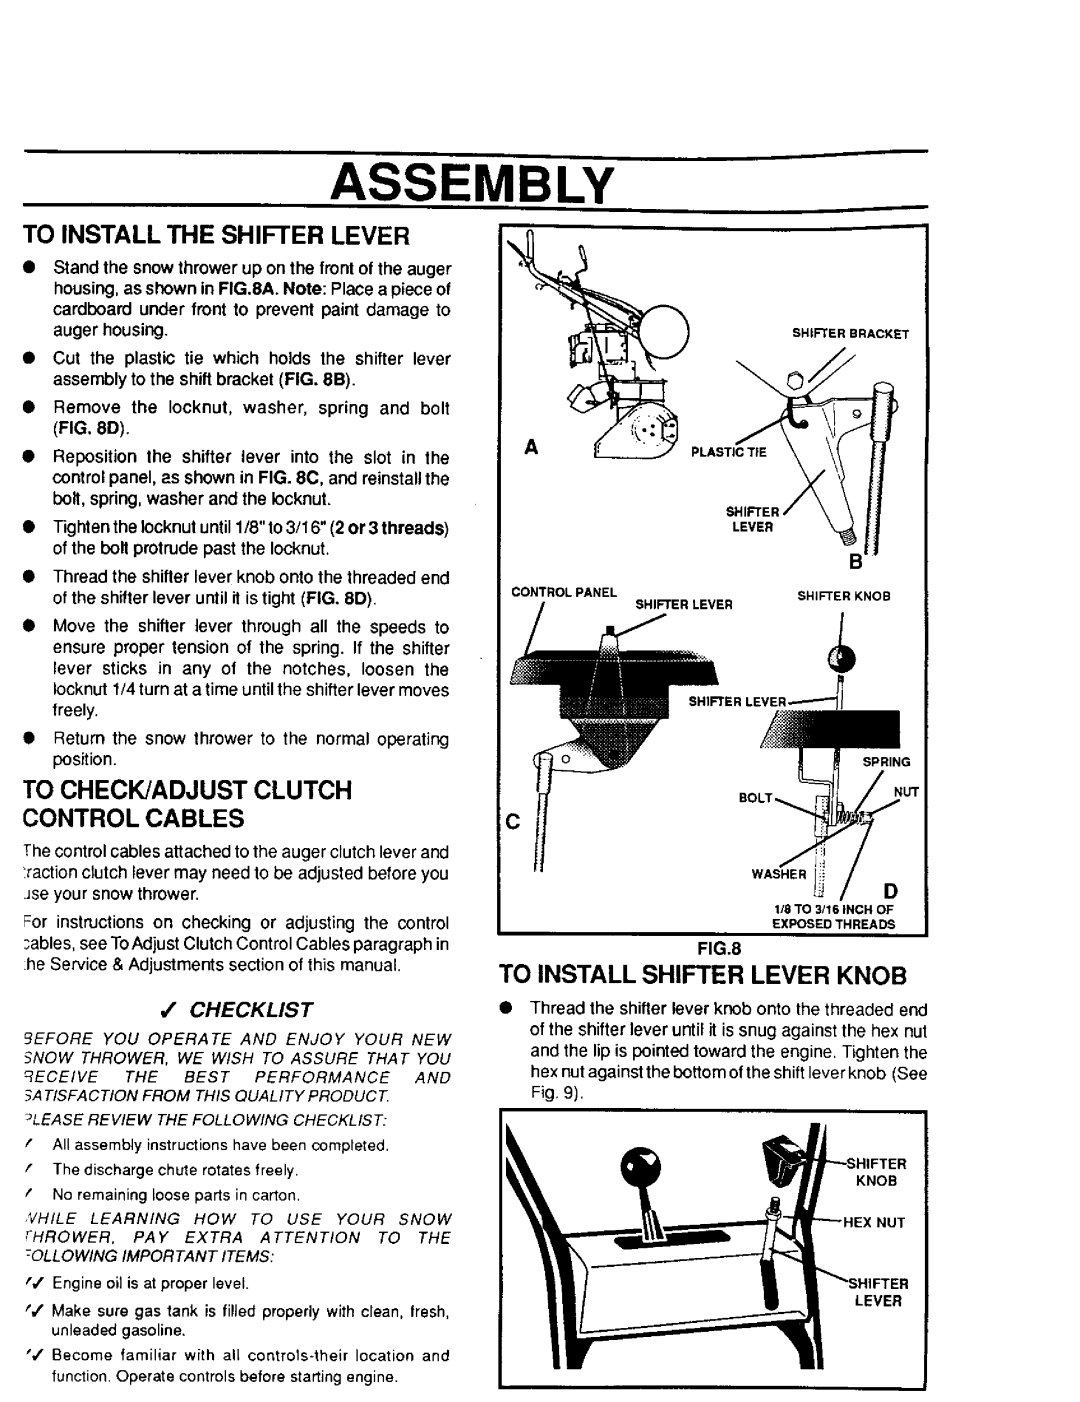 Sears 536.886331 owner manual Assembly, To Check/Adjust Clutch Control Cables, To Install The Shifter Lever, Checklist 